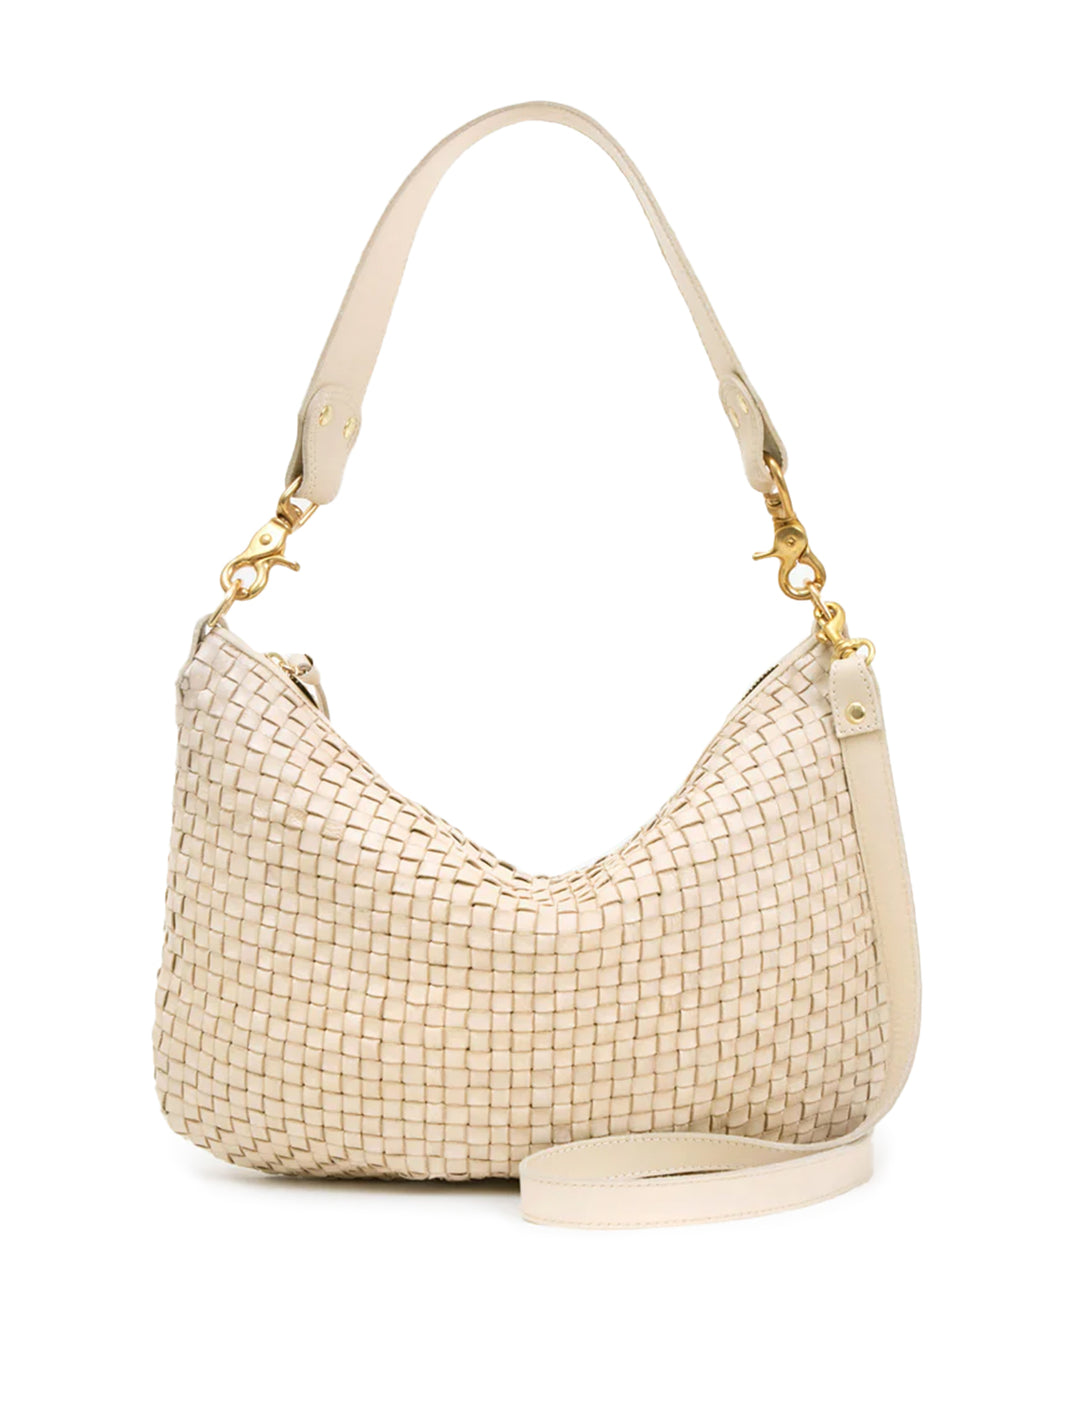 Front view of Clare V.'s moyen messenger in new cream woven checker.